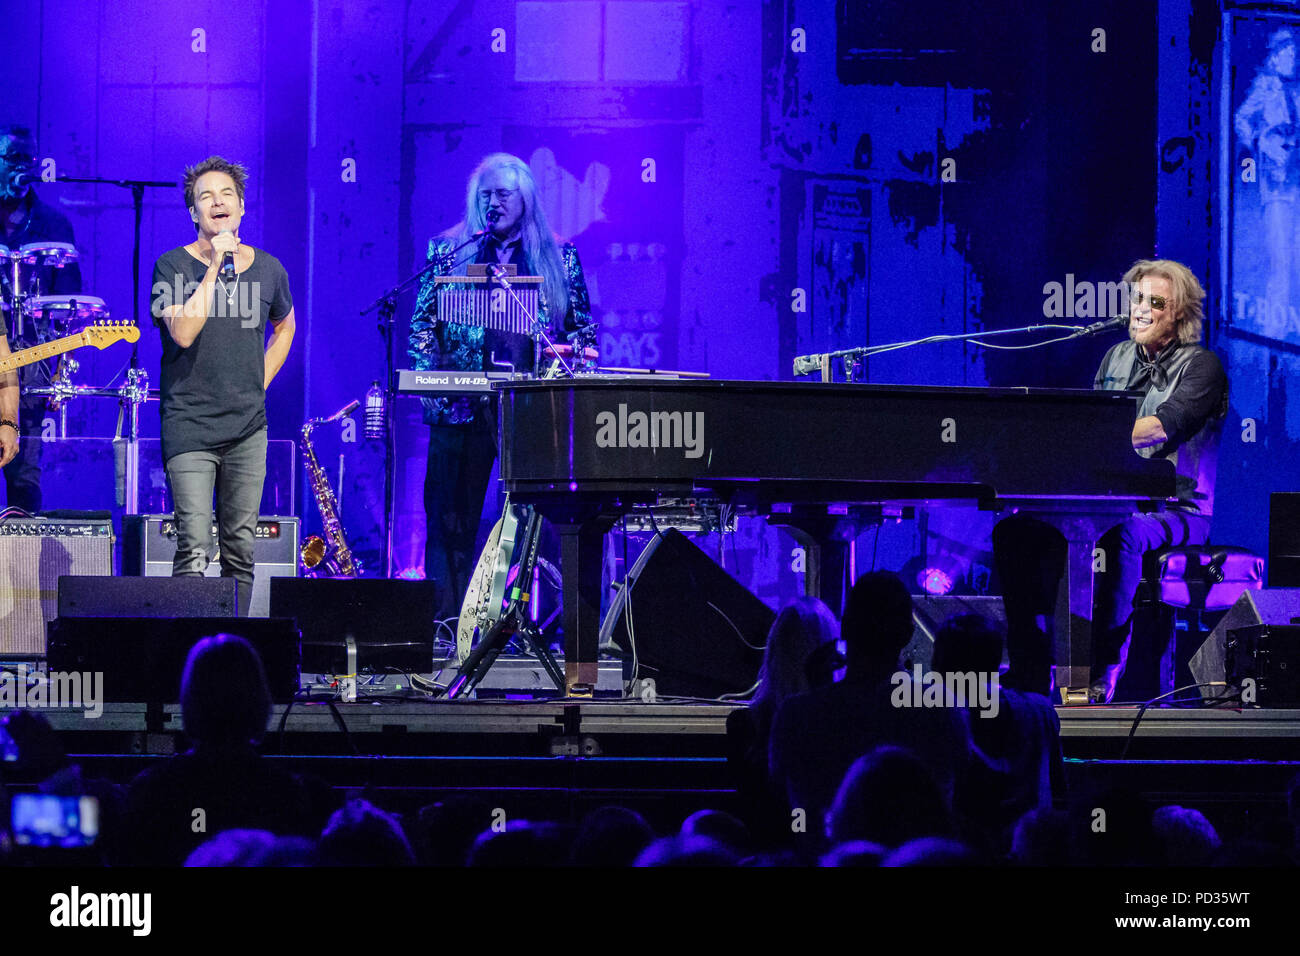 San Diego, California, USA. 4th Aug, 2018. PAT MONAHAN (L) joins DARYL HALL (R) and JOHN OATES on stage at Viejas Arena in San Diego, California on August 4, 2018 Credit: Marissa Carter/ZUMA Wire/Alamy Live News Stock Photo